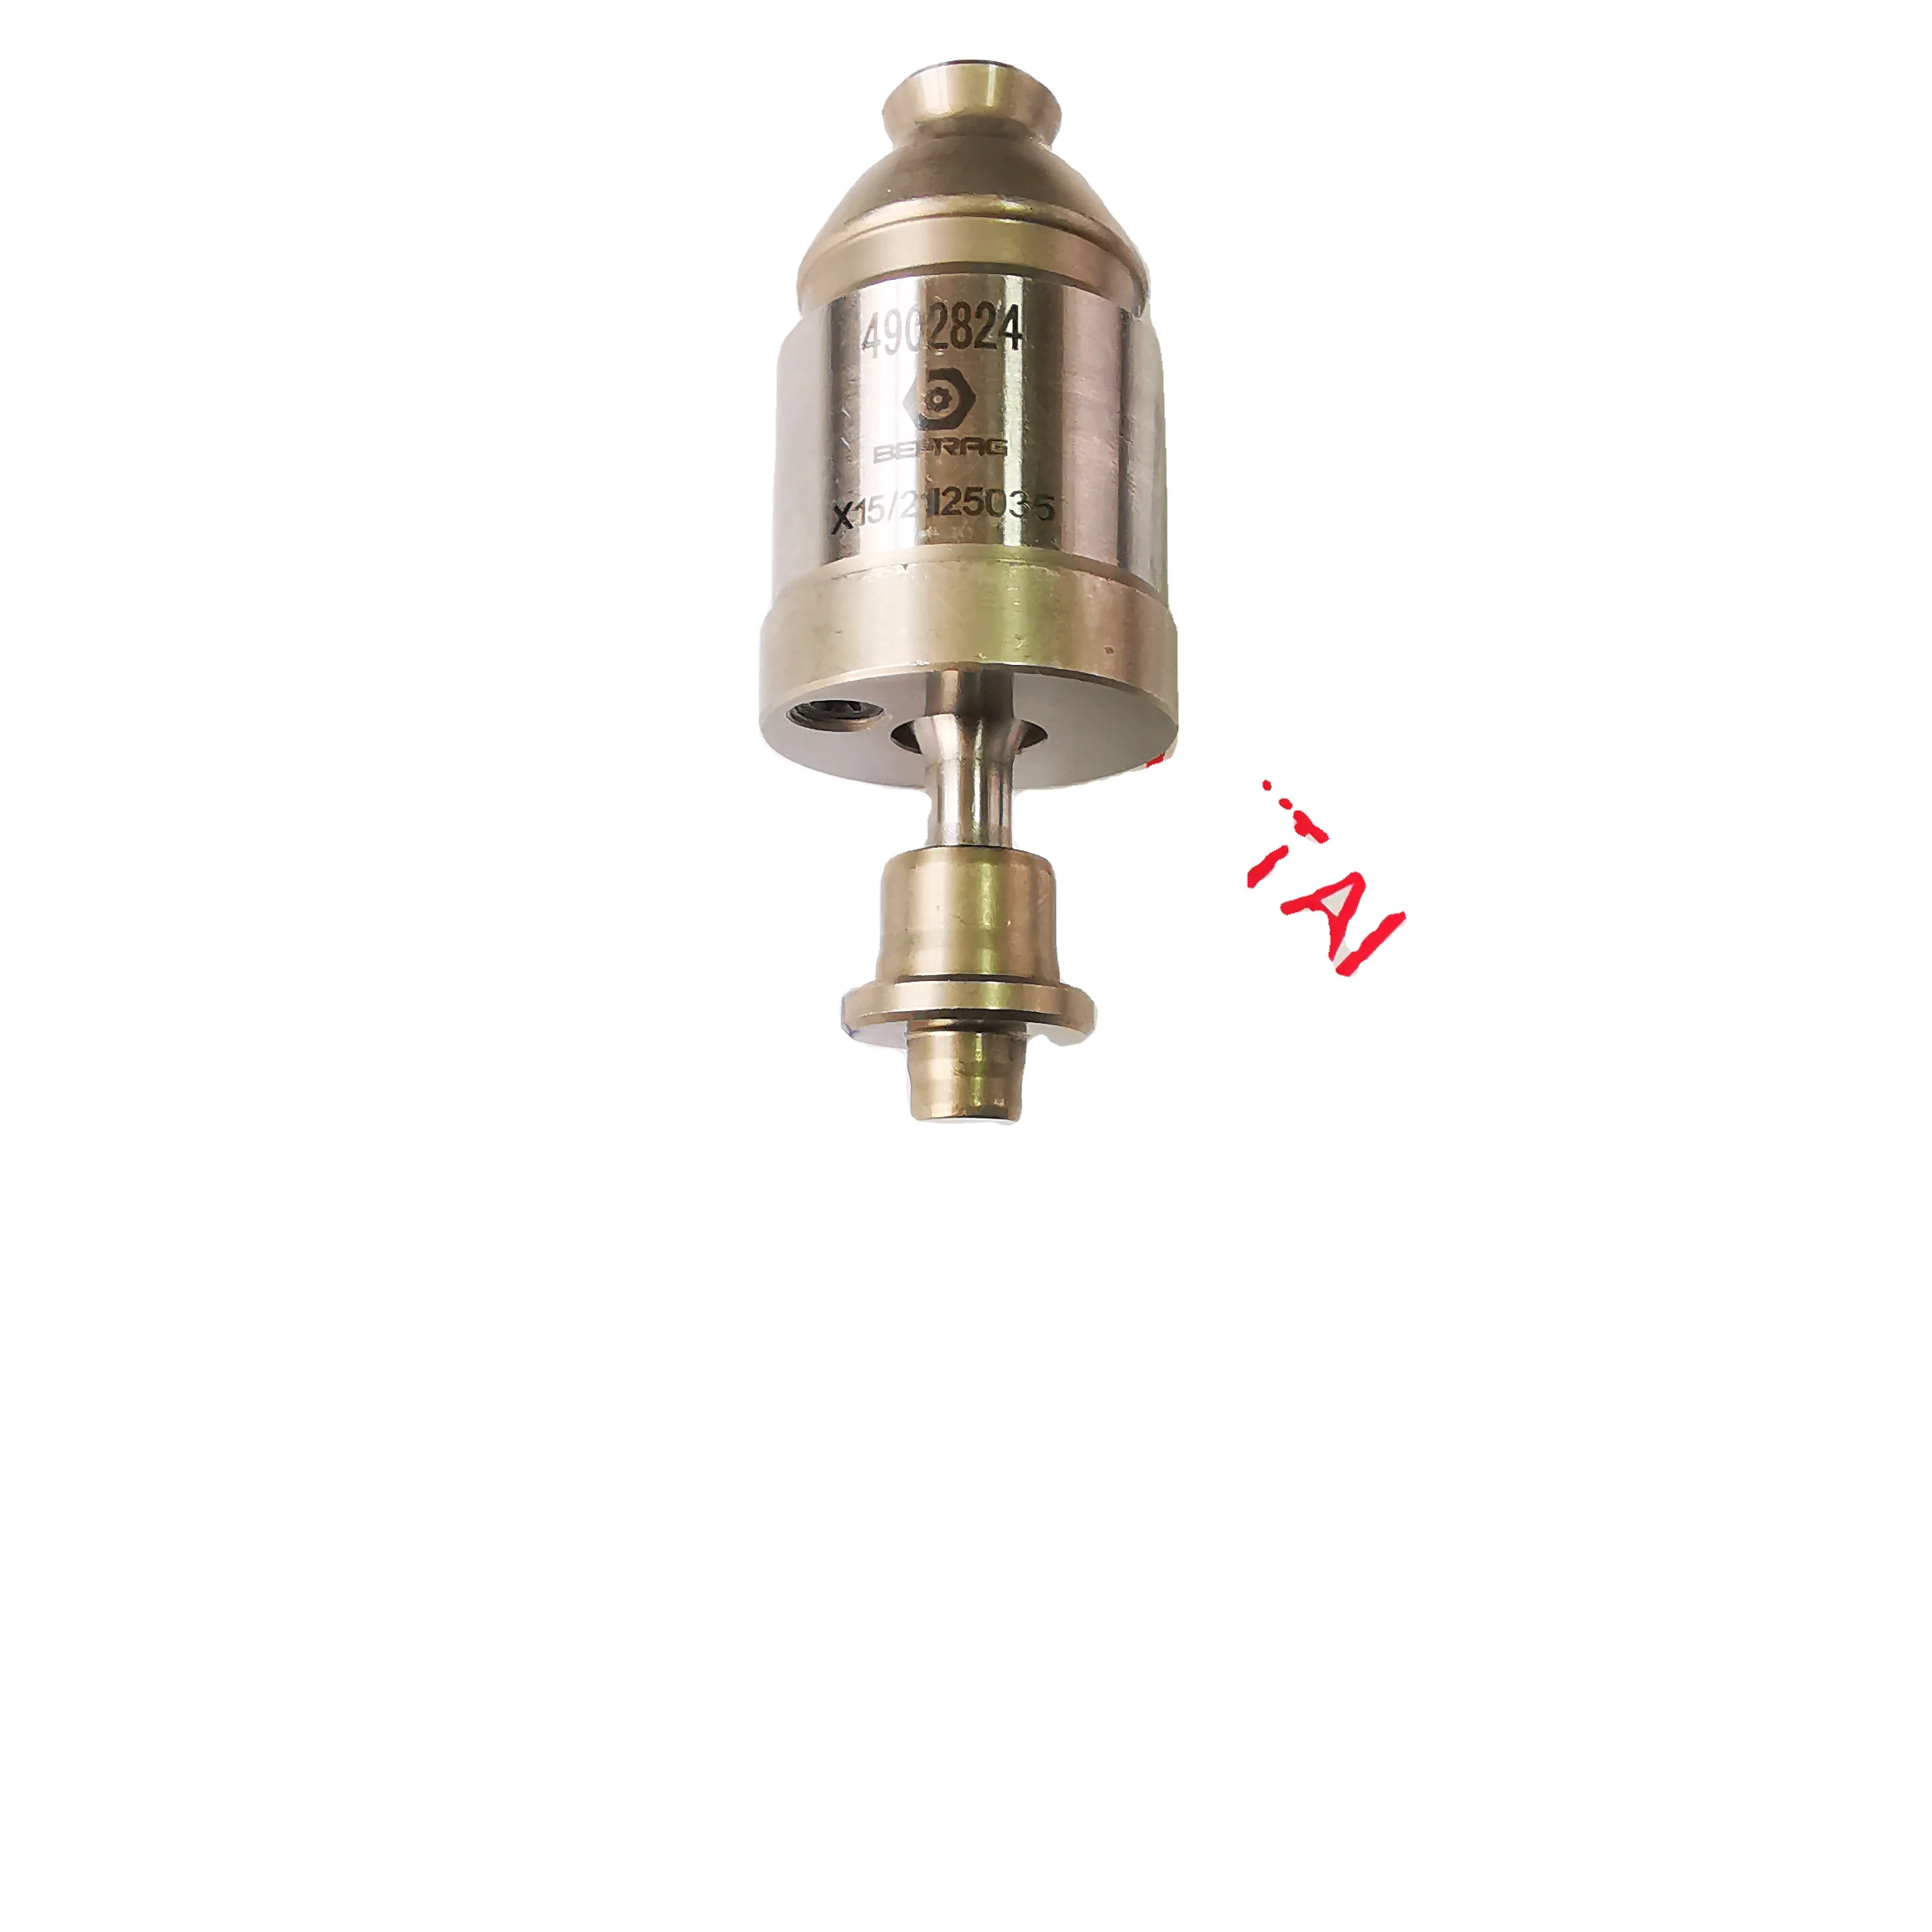 Isx Qsx15 Nozzle 4902824 For Injector 1846348 - Buy 4902824,Qsk15  X15,Nozzle For 1846348 Product on Alibaba.com